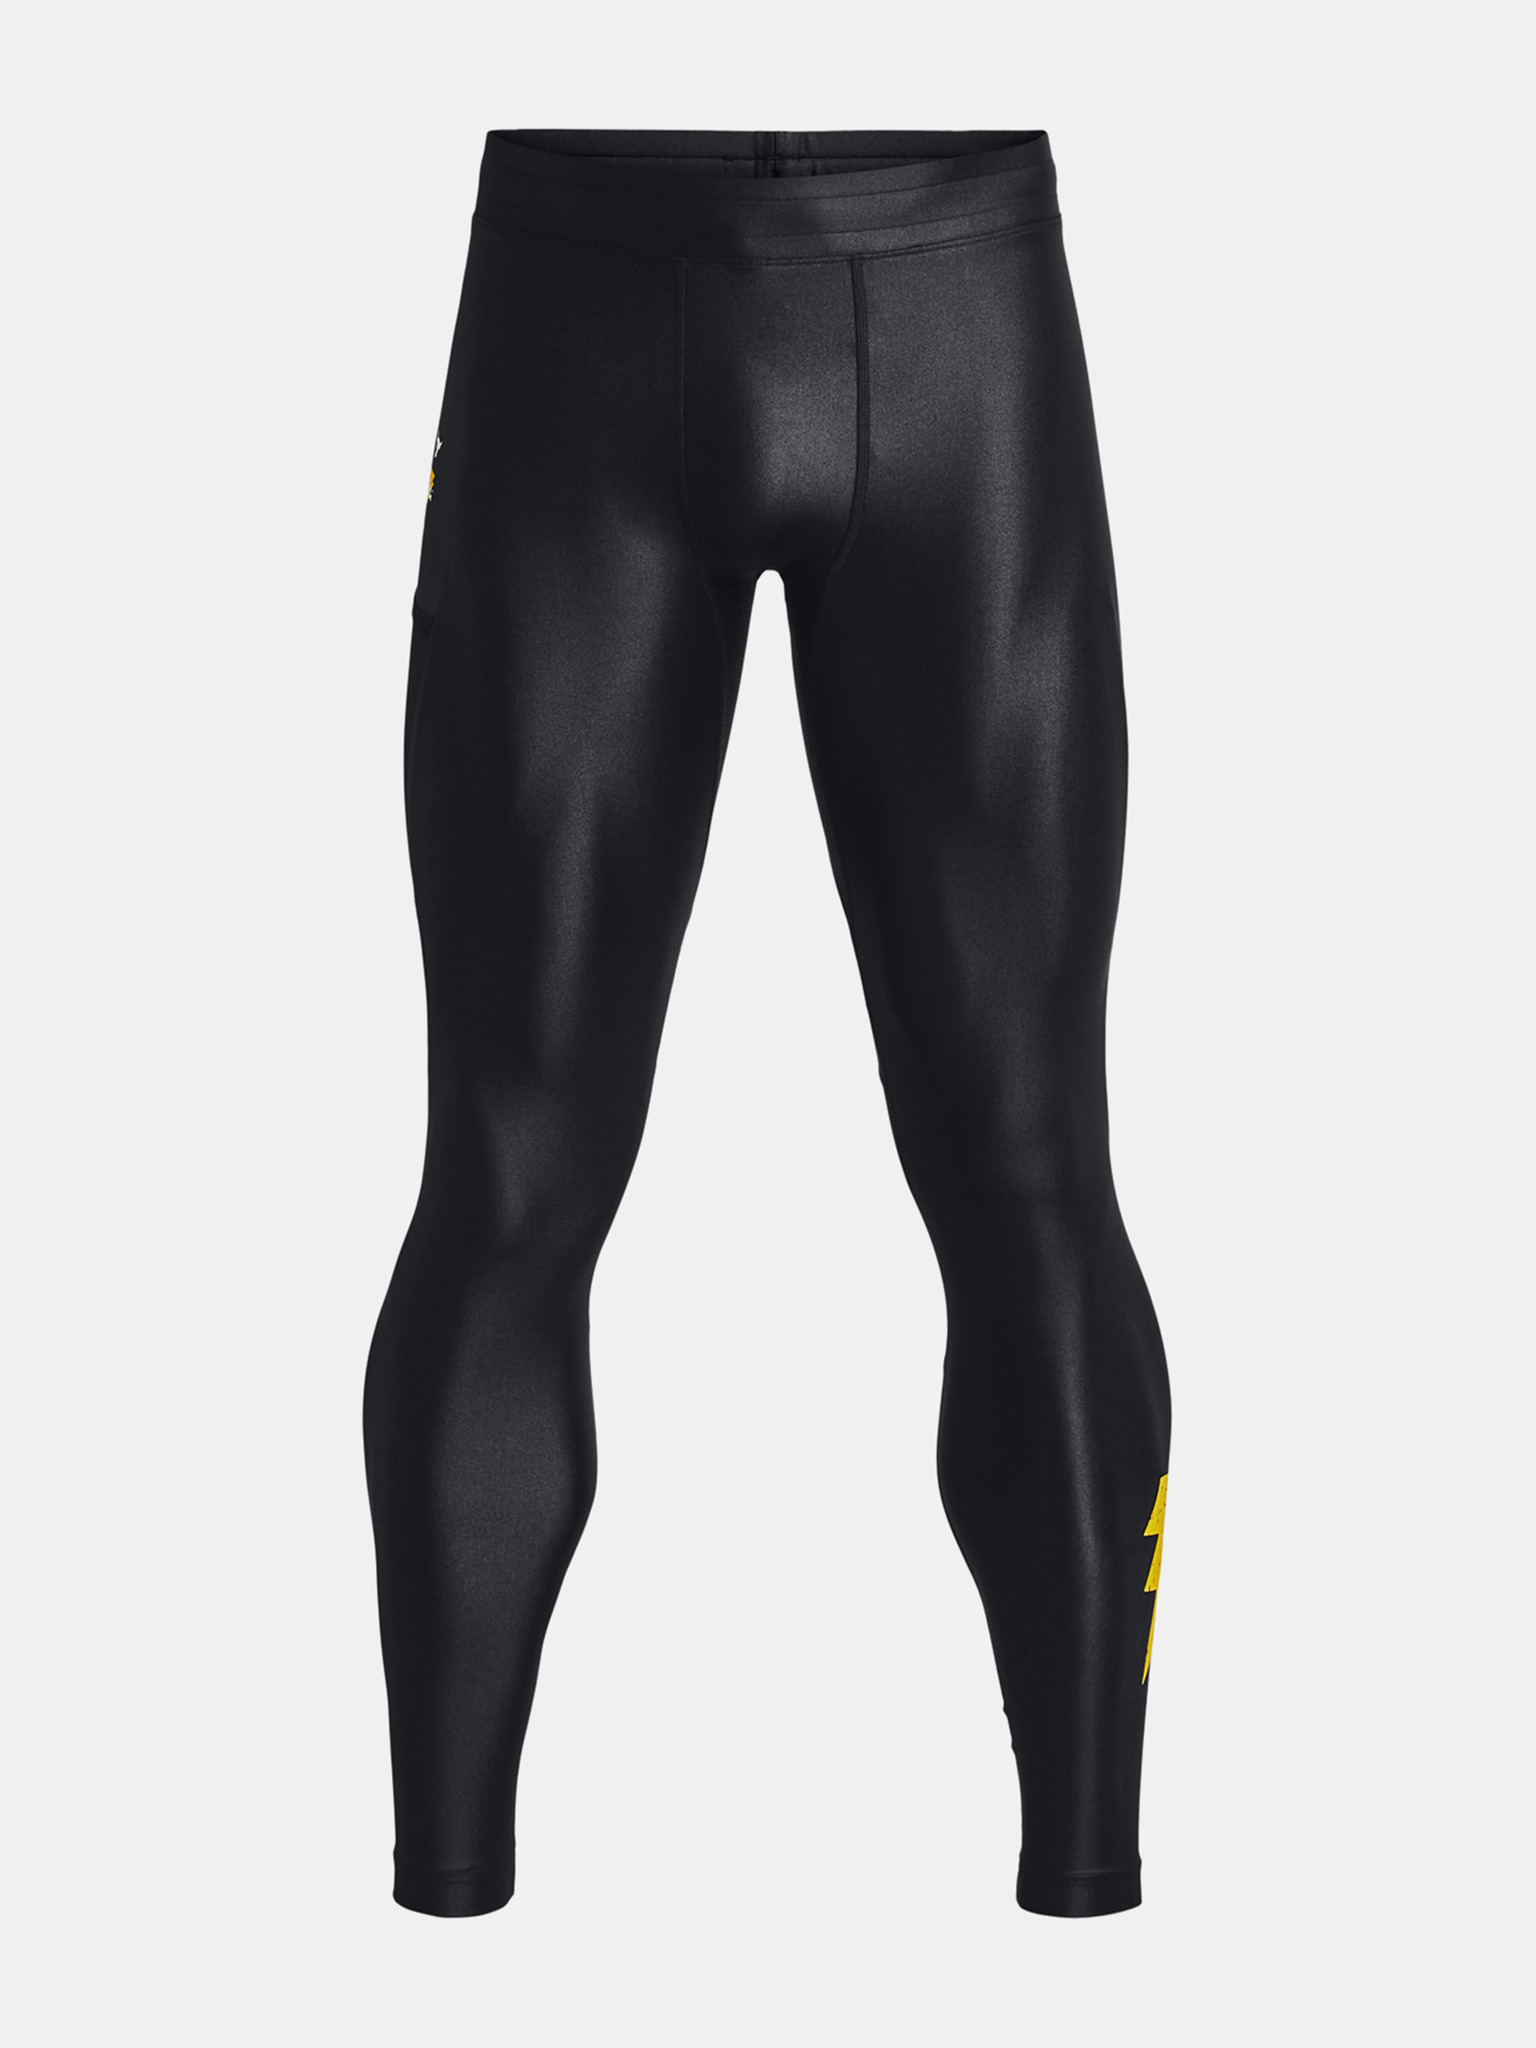 Under Armour Iso-Chill Compression Leggings Black 1365226-001